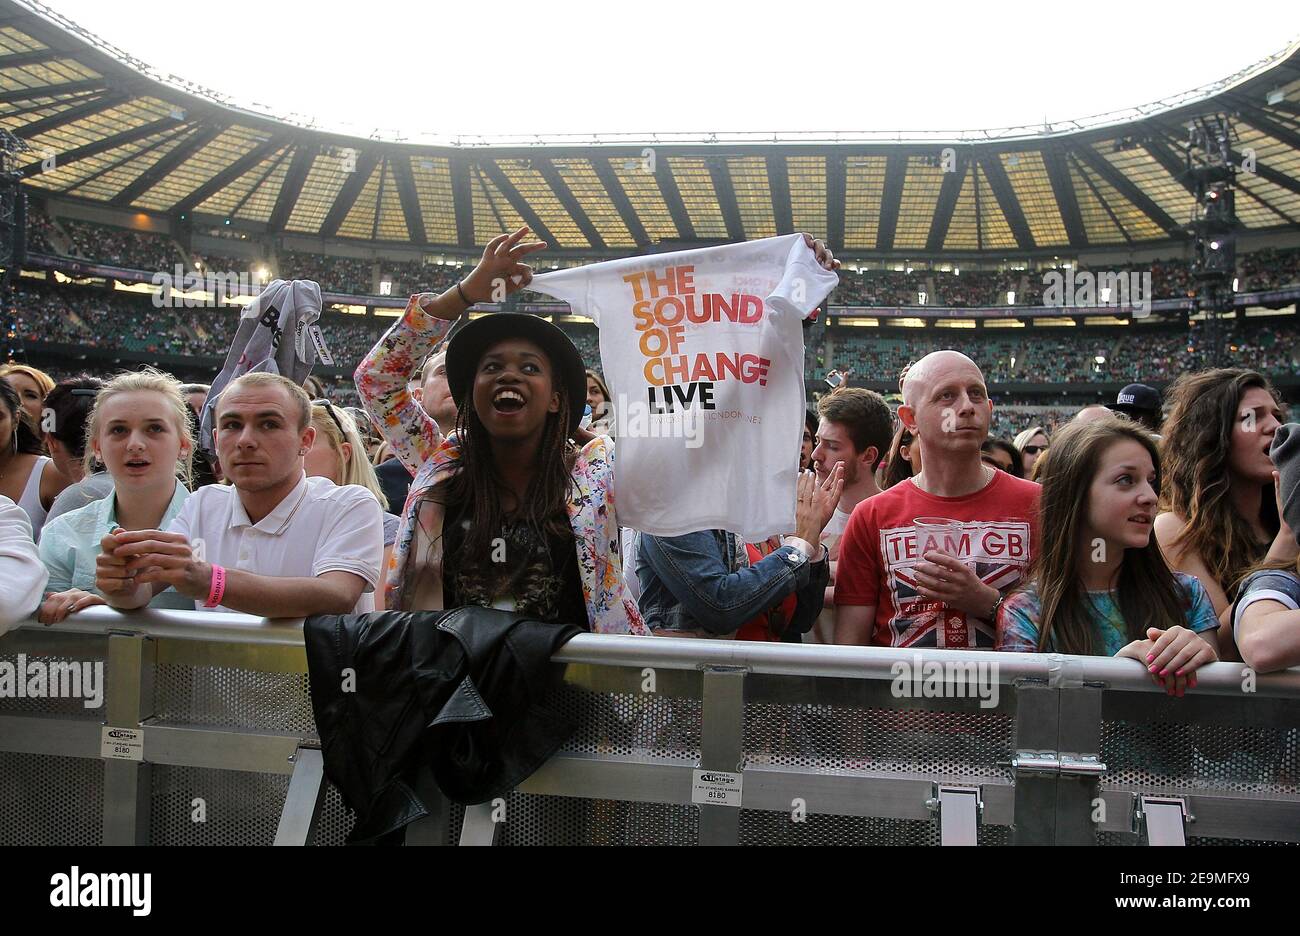 Twickenham, UK. 1st June 2013. Crown, Fans, holding 'T' Shirt during the Sound of Change Live Concert at Chime for Change at Twickenham Stadium in Twickenham. Credit: S.A.M./Alamy   CREDIT: S.A.M./ALamy Stock Photo